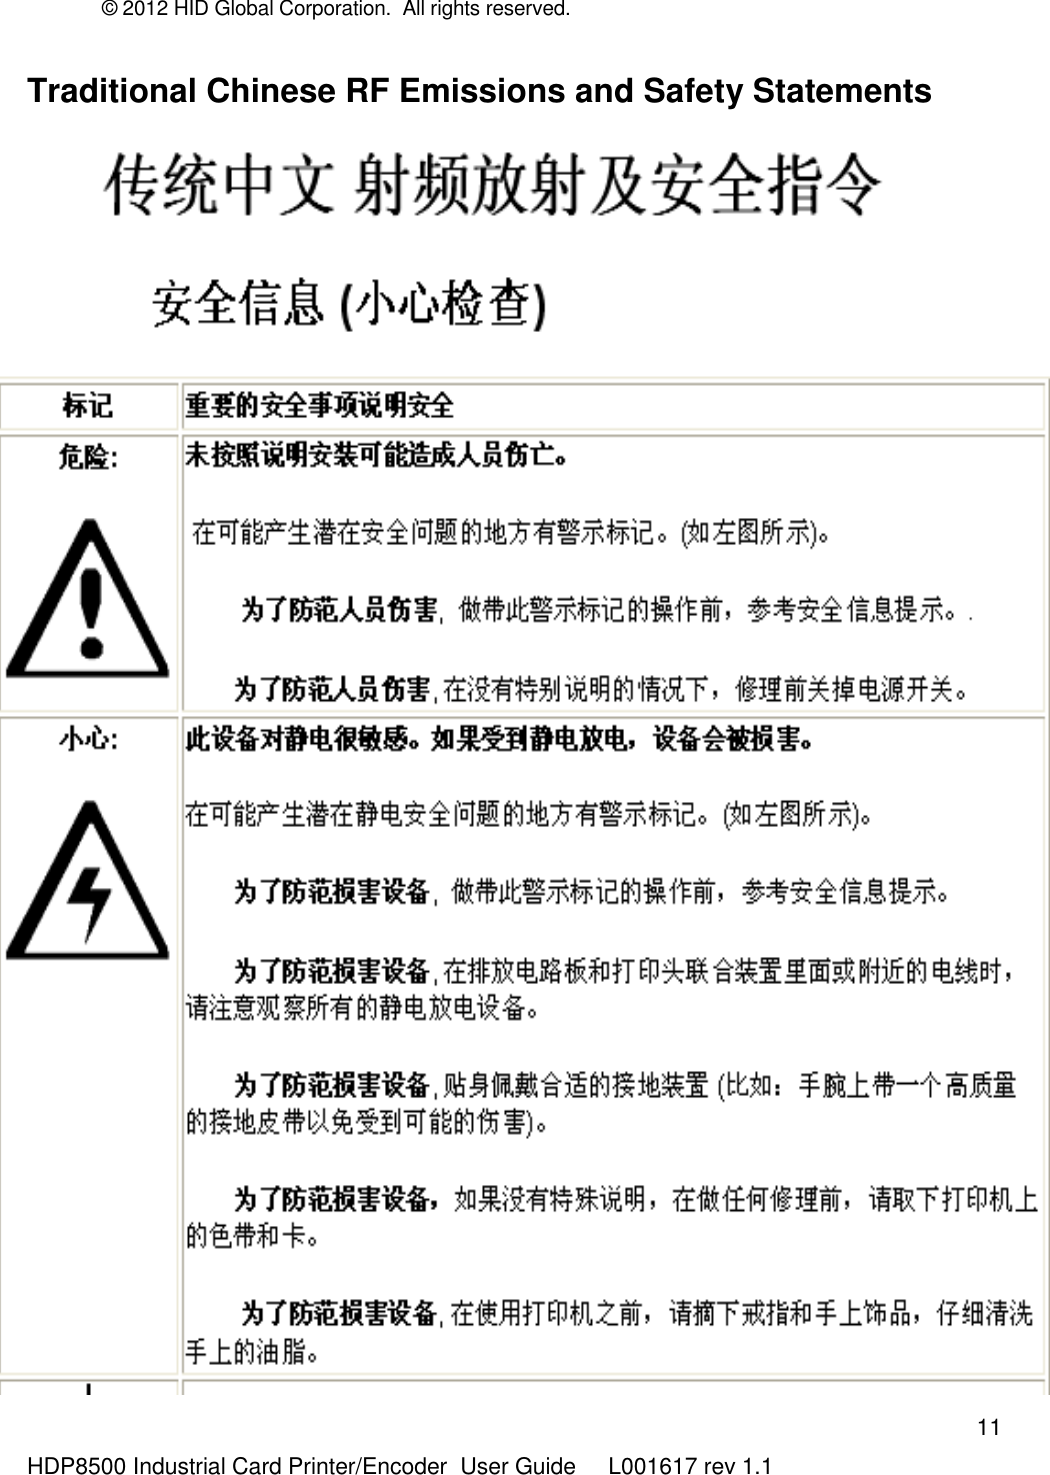 © 2012 HID Global Corporation.  All rights reserved.  11 HDP8500 Industrial Card Printer/Encoder  User Guide     L001617 rev 1.1 Traditional Chinese RF Emissions and Safety Statements  